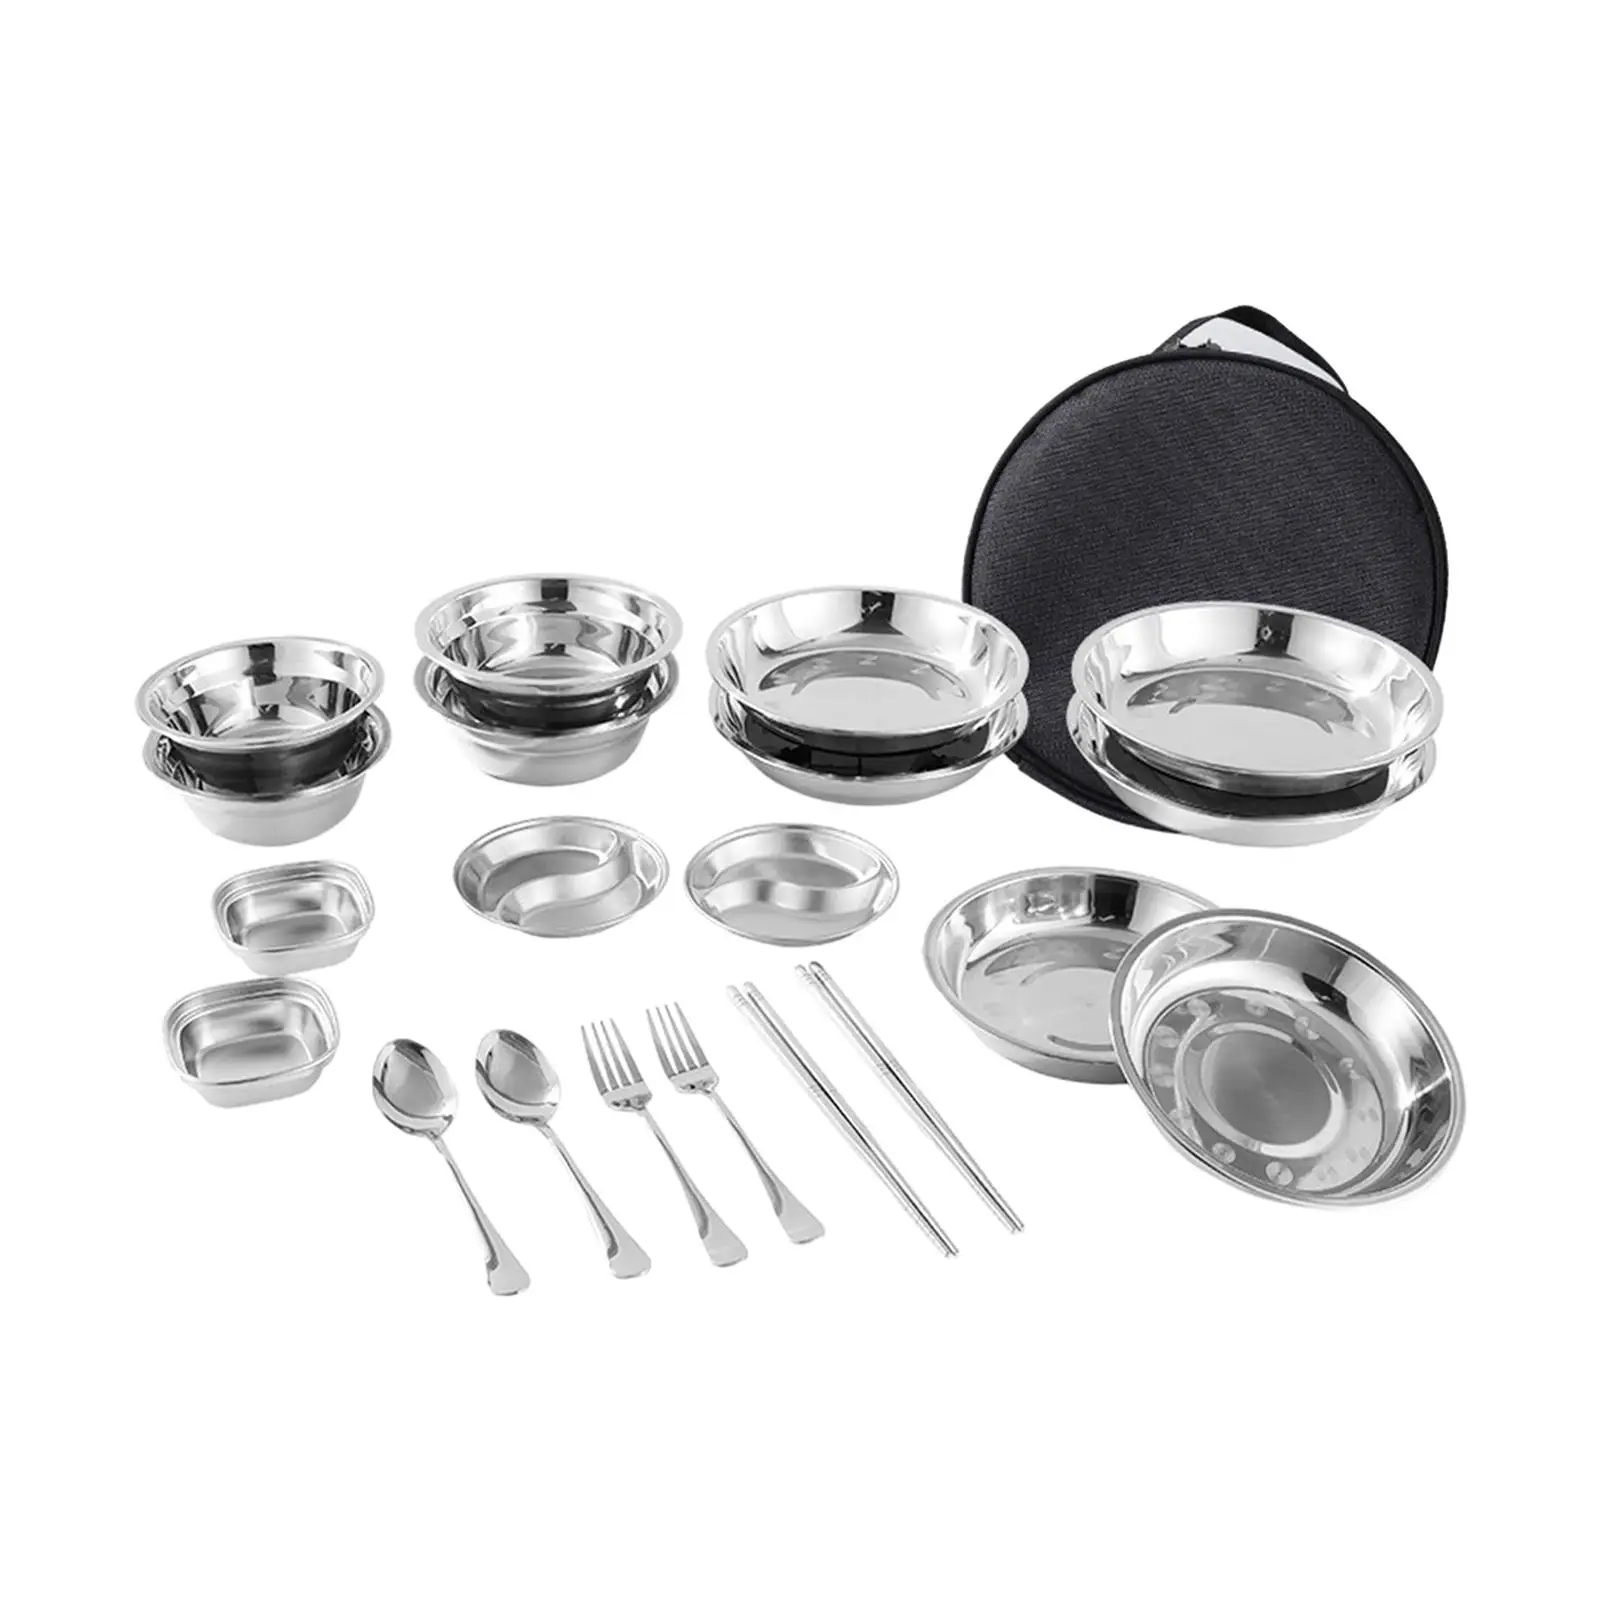 Stainless Steel Plates and Bowls Camping Cutlery Set Dishes Tableware with